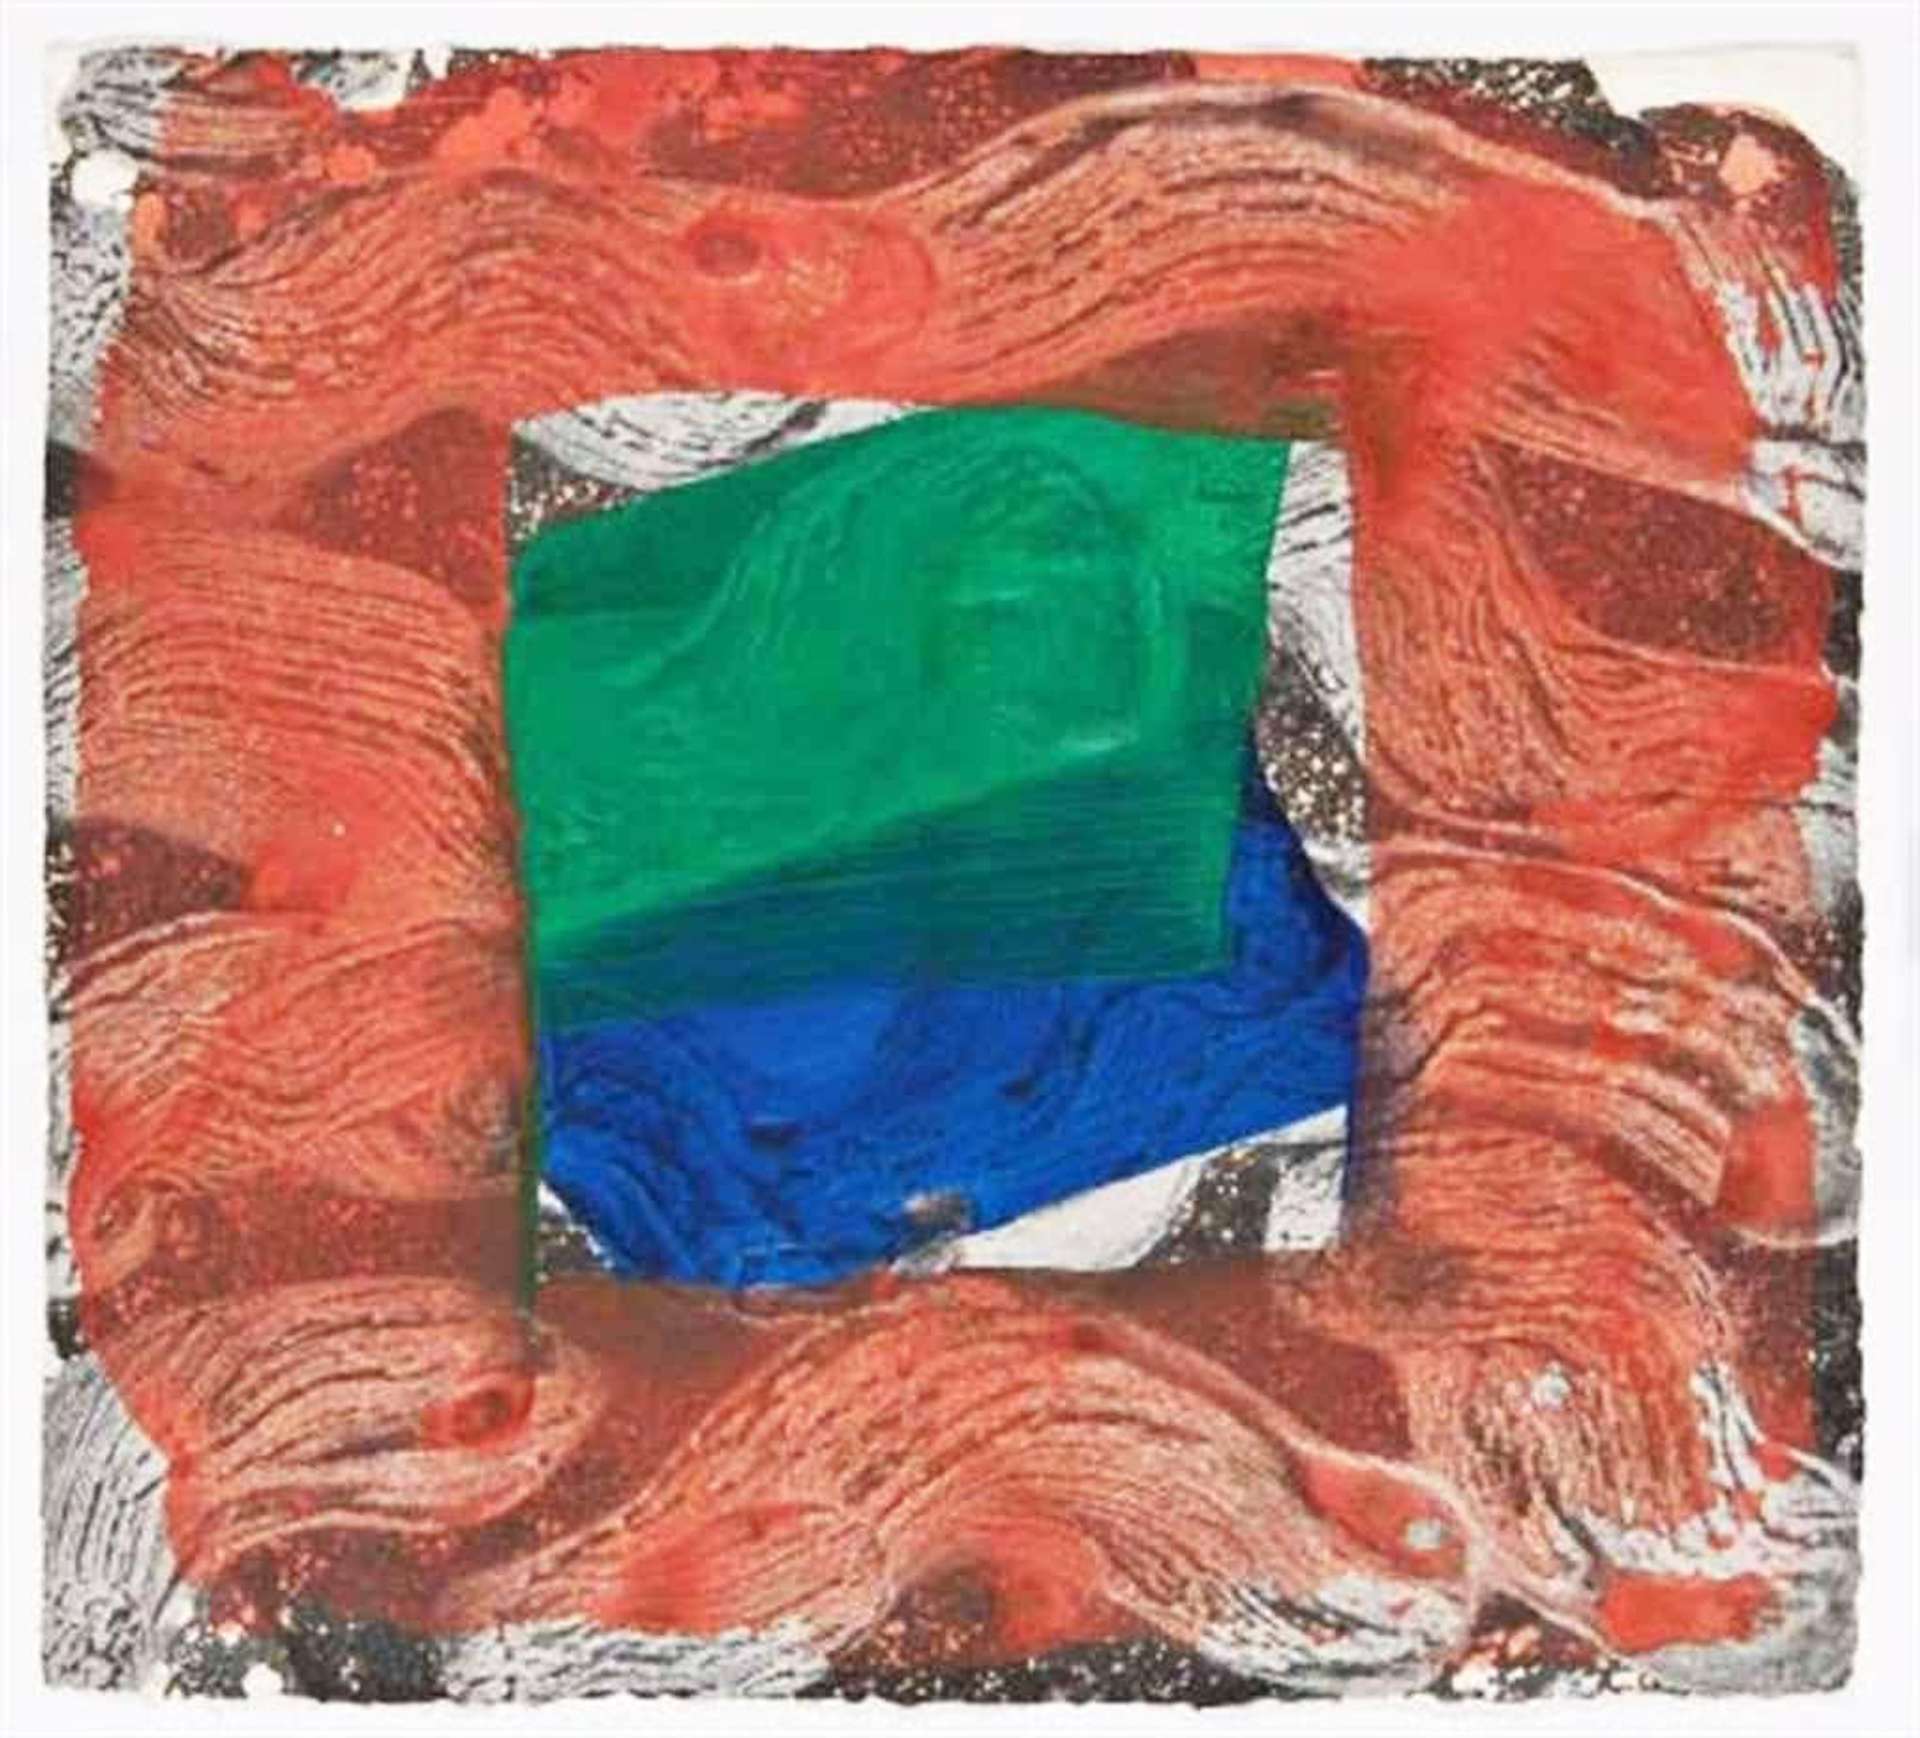 Book For the Paris Review - Signed Print by Howard Hodgkin 1997 - MyArtBroker